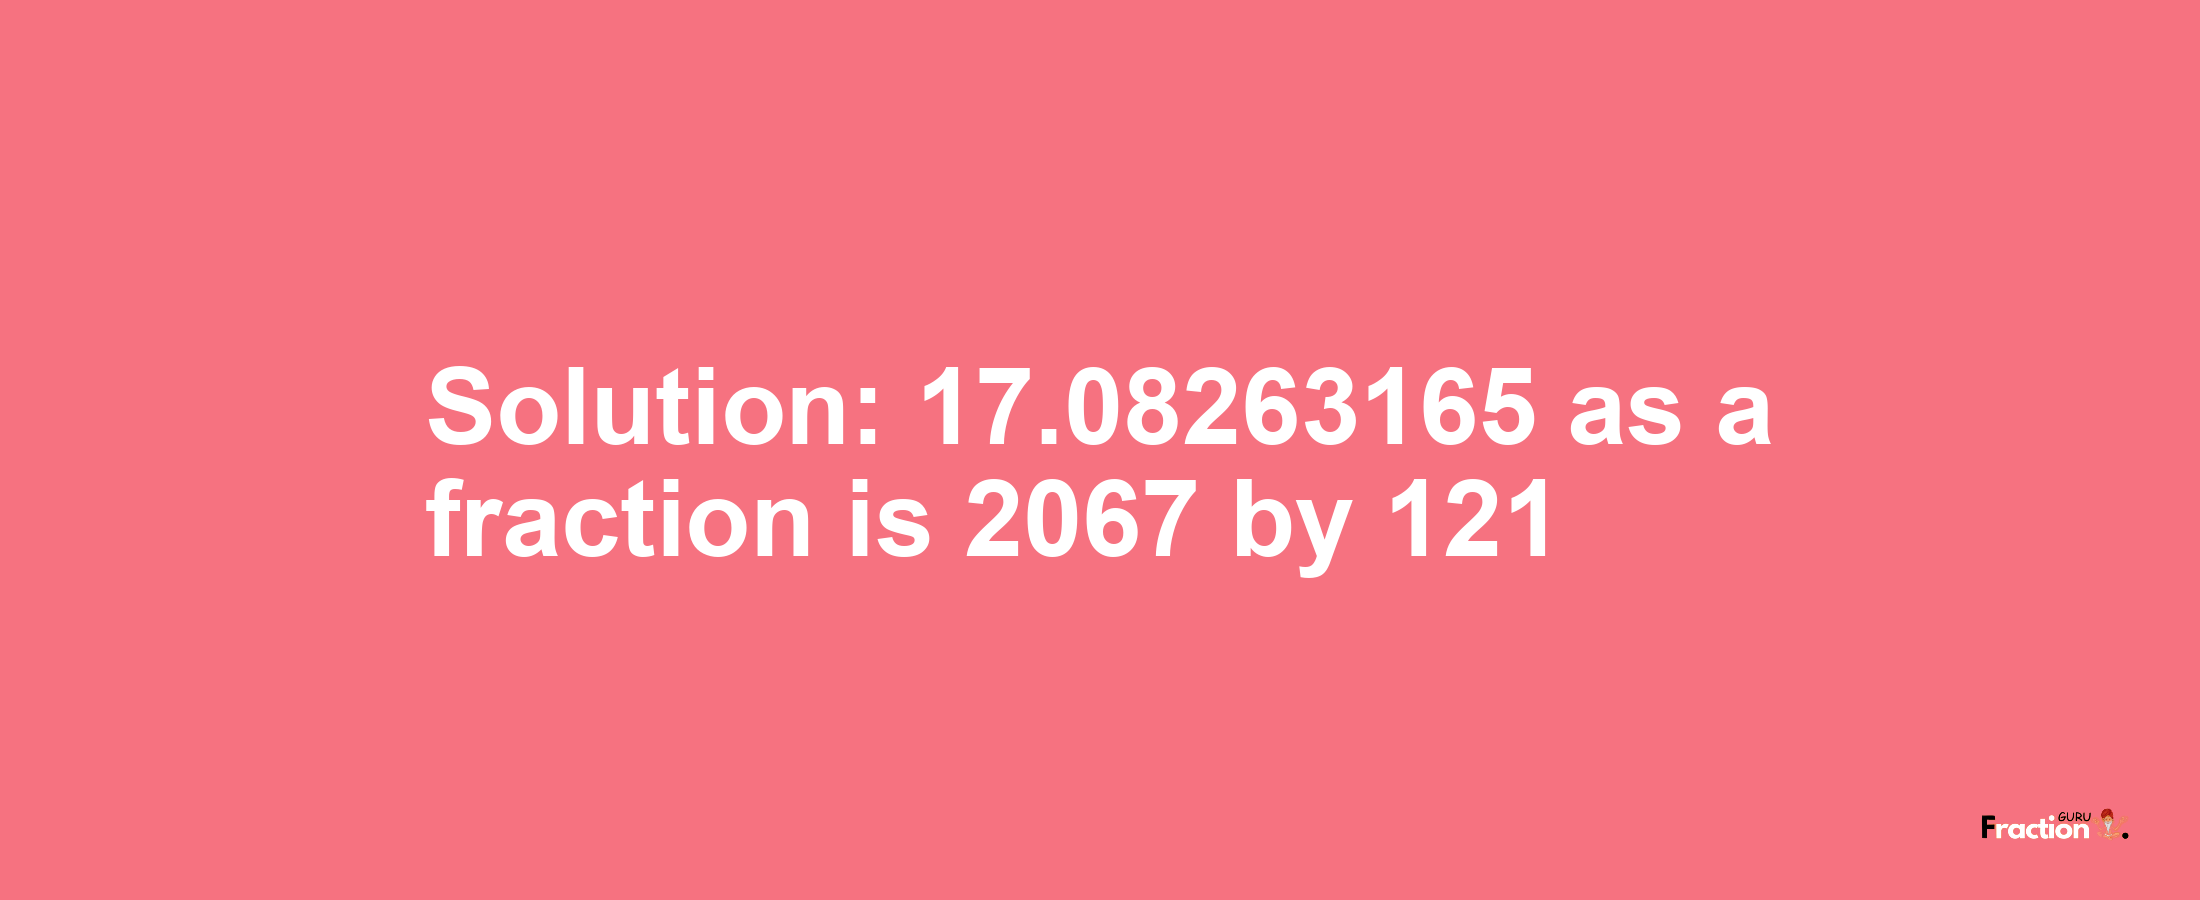 Solution:17.08263165 as a fraction is 2067/121